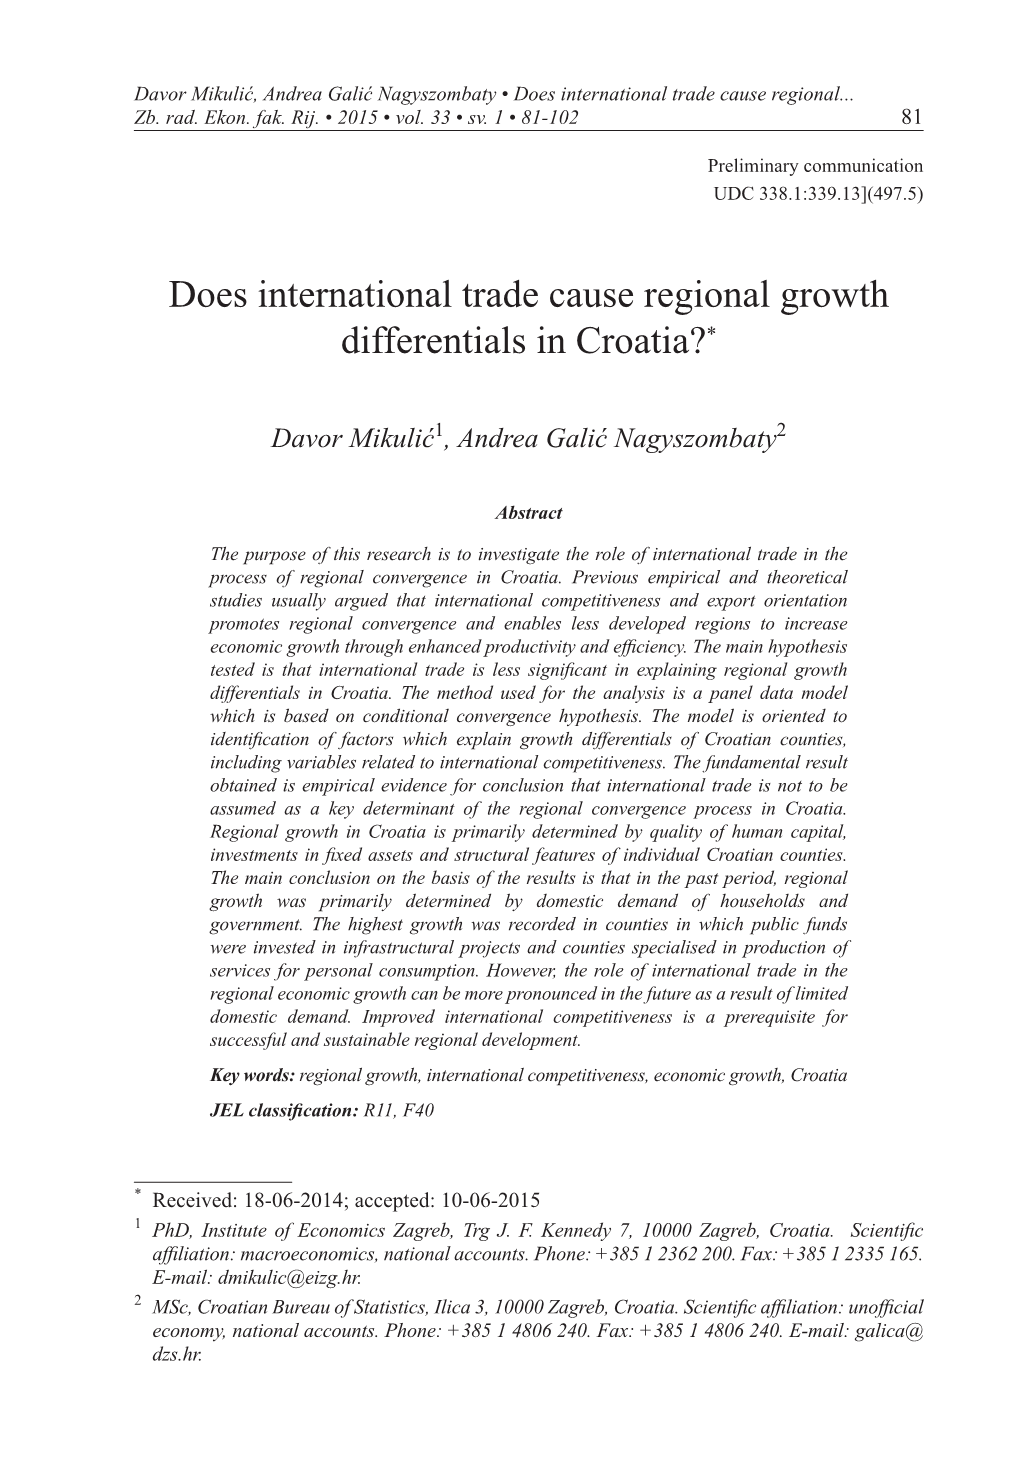 Does International Trade Cause Regional Growth Differentials in Croatia?*